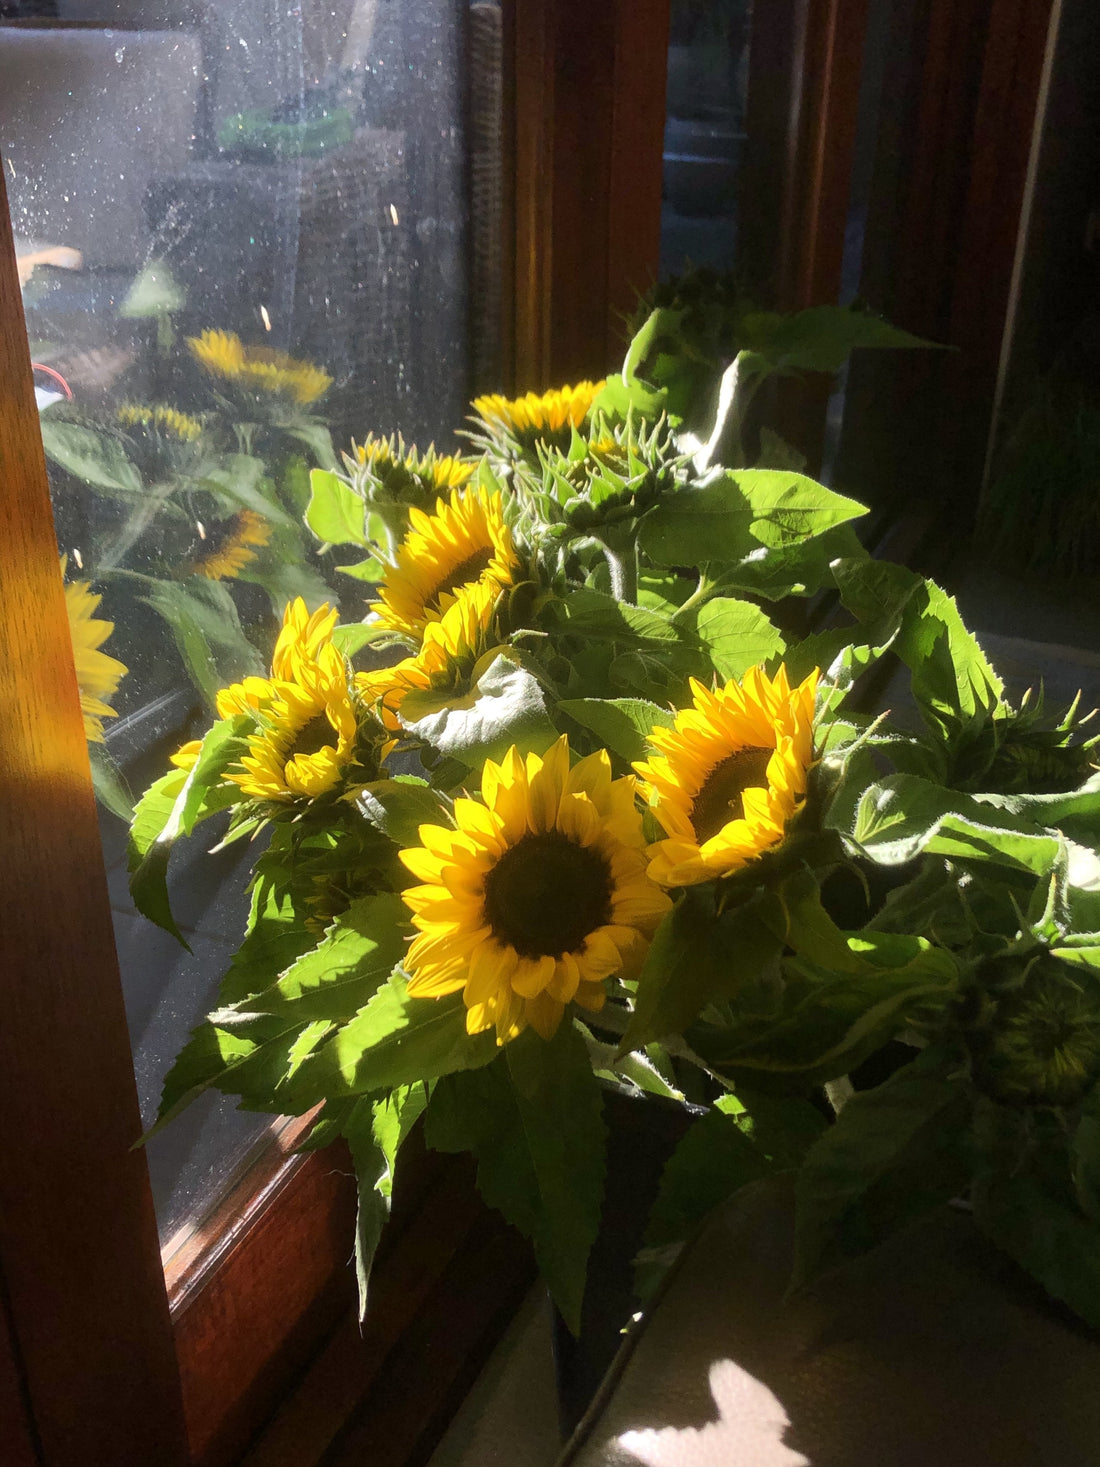 Flower of the Month: Sunflowers - Flowers Gold Coast